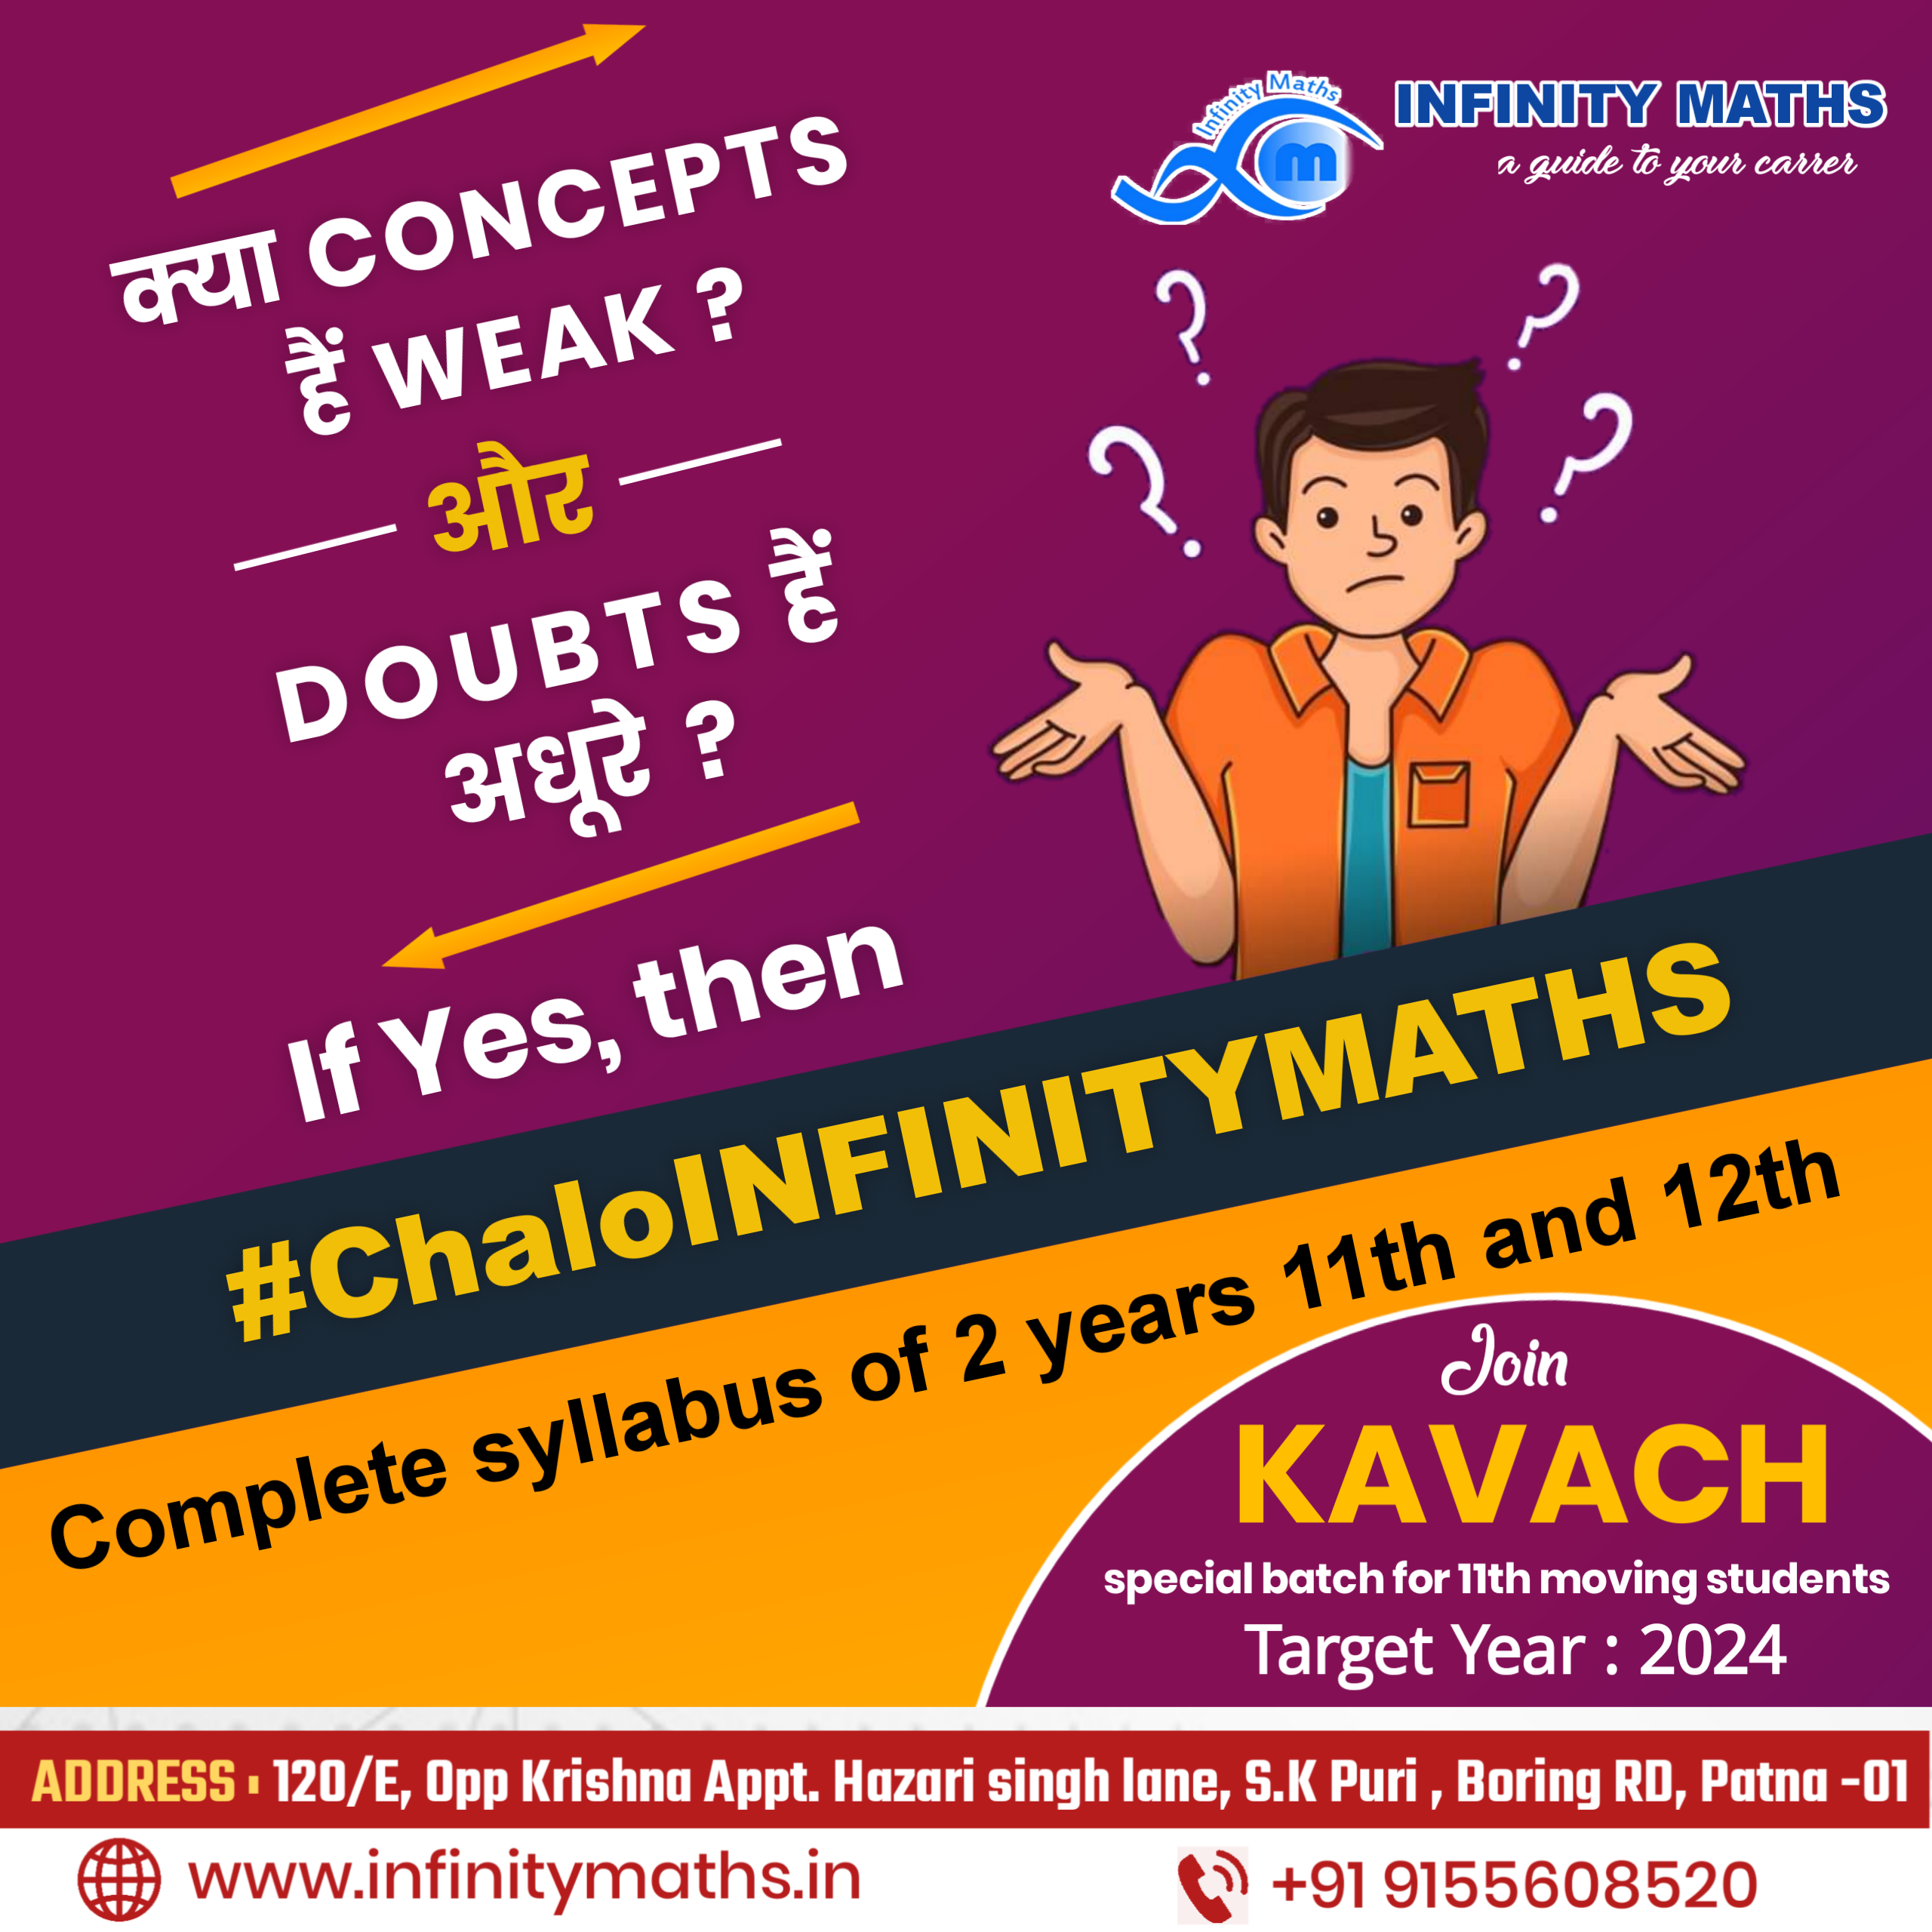 Infinity Maths is one of the top and best maths classes in Boring Road